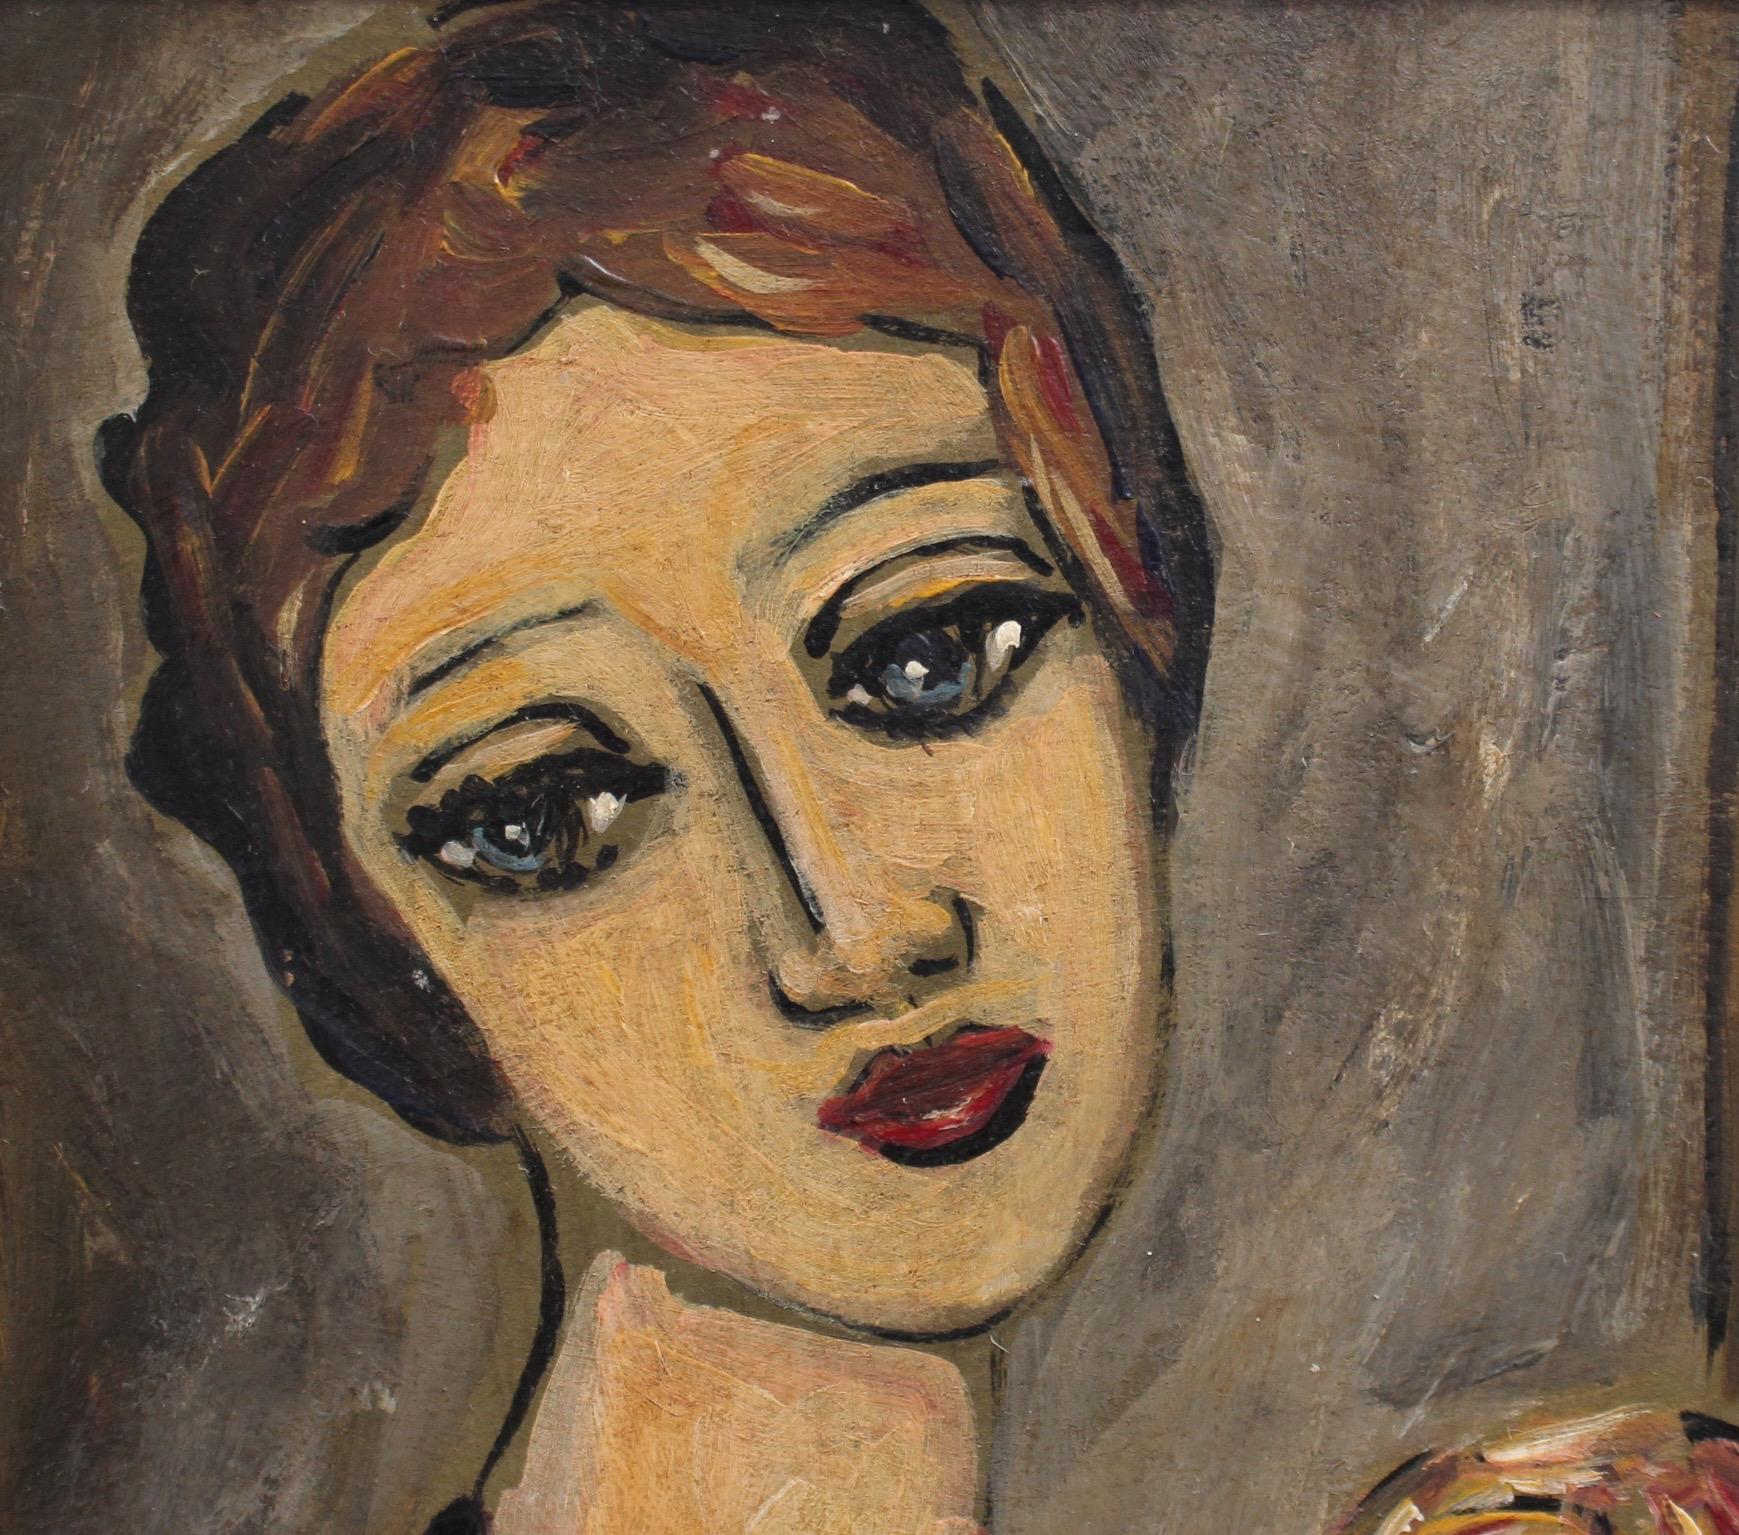 'Pensive Woman with Rose', oil on board, by unknown artist with initials F.O.R. (circa 1940s - 1950s). This is a portrait of an elegant young woman in the dress of a 1920s flapper but without the verve and gusto associated with the period. Flappers